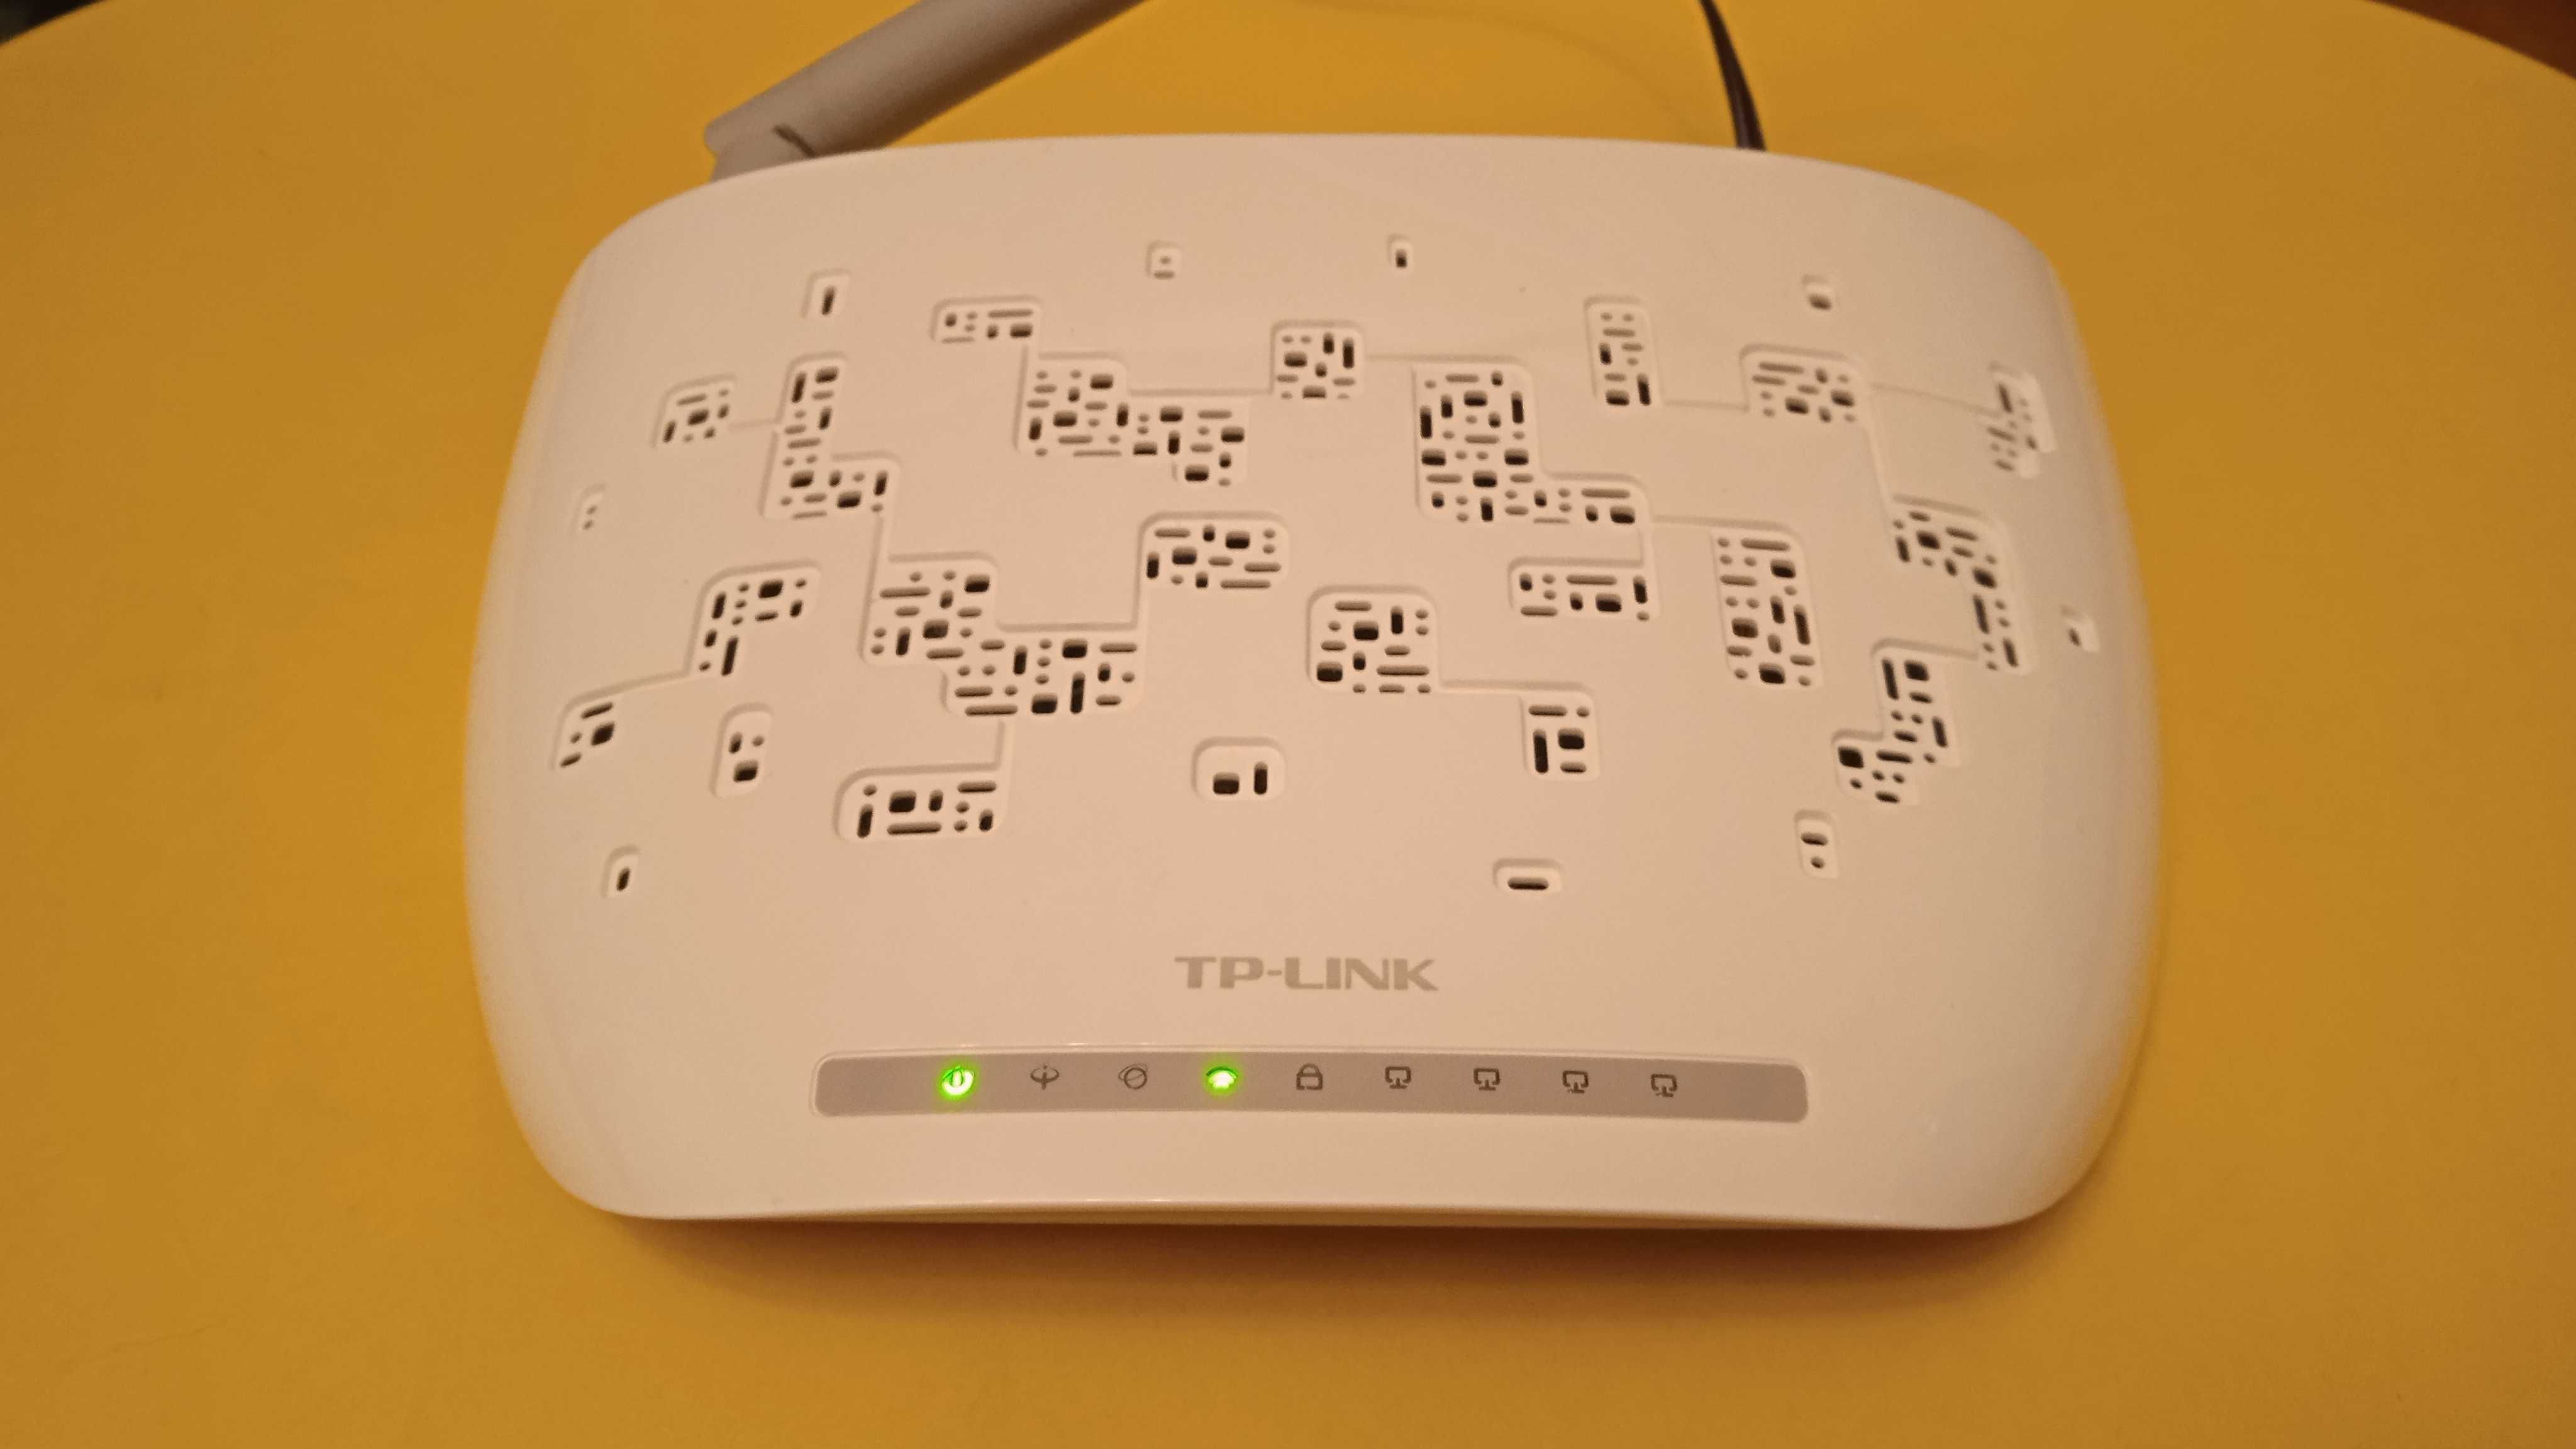 Router TP-link TD-W8951ND